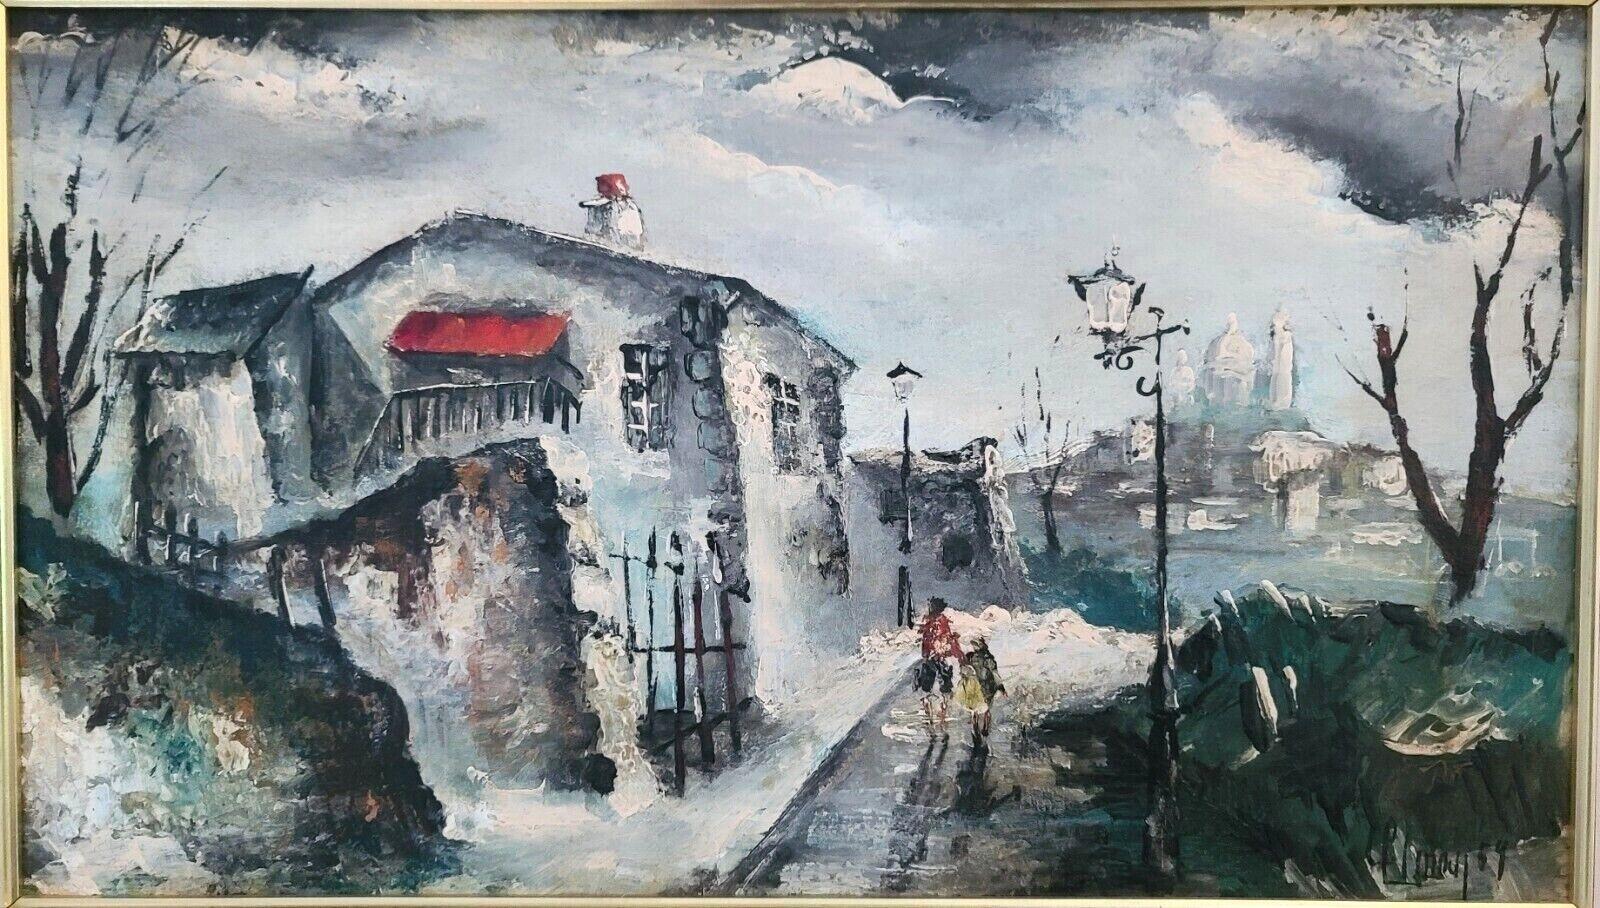 For FULL item description be sure to click on CONTINUE READING at the bottom of this listing.

Offering One Of Our Recent Palm Beach Estate Fine Art Acquisitions Of A
Signed Maurice de Vlaminck Style 1959 French Painting of Menilmontant Paris